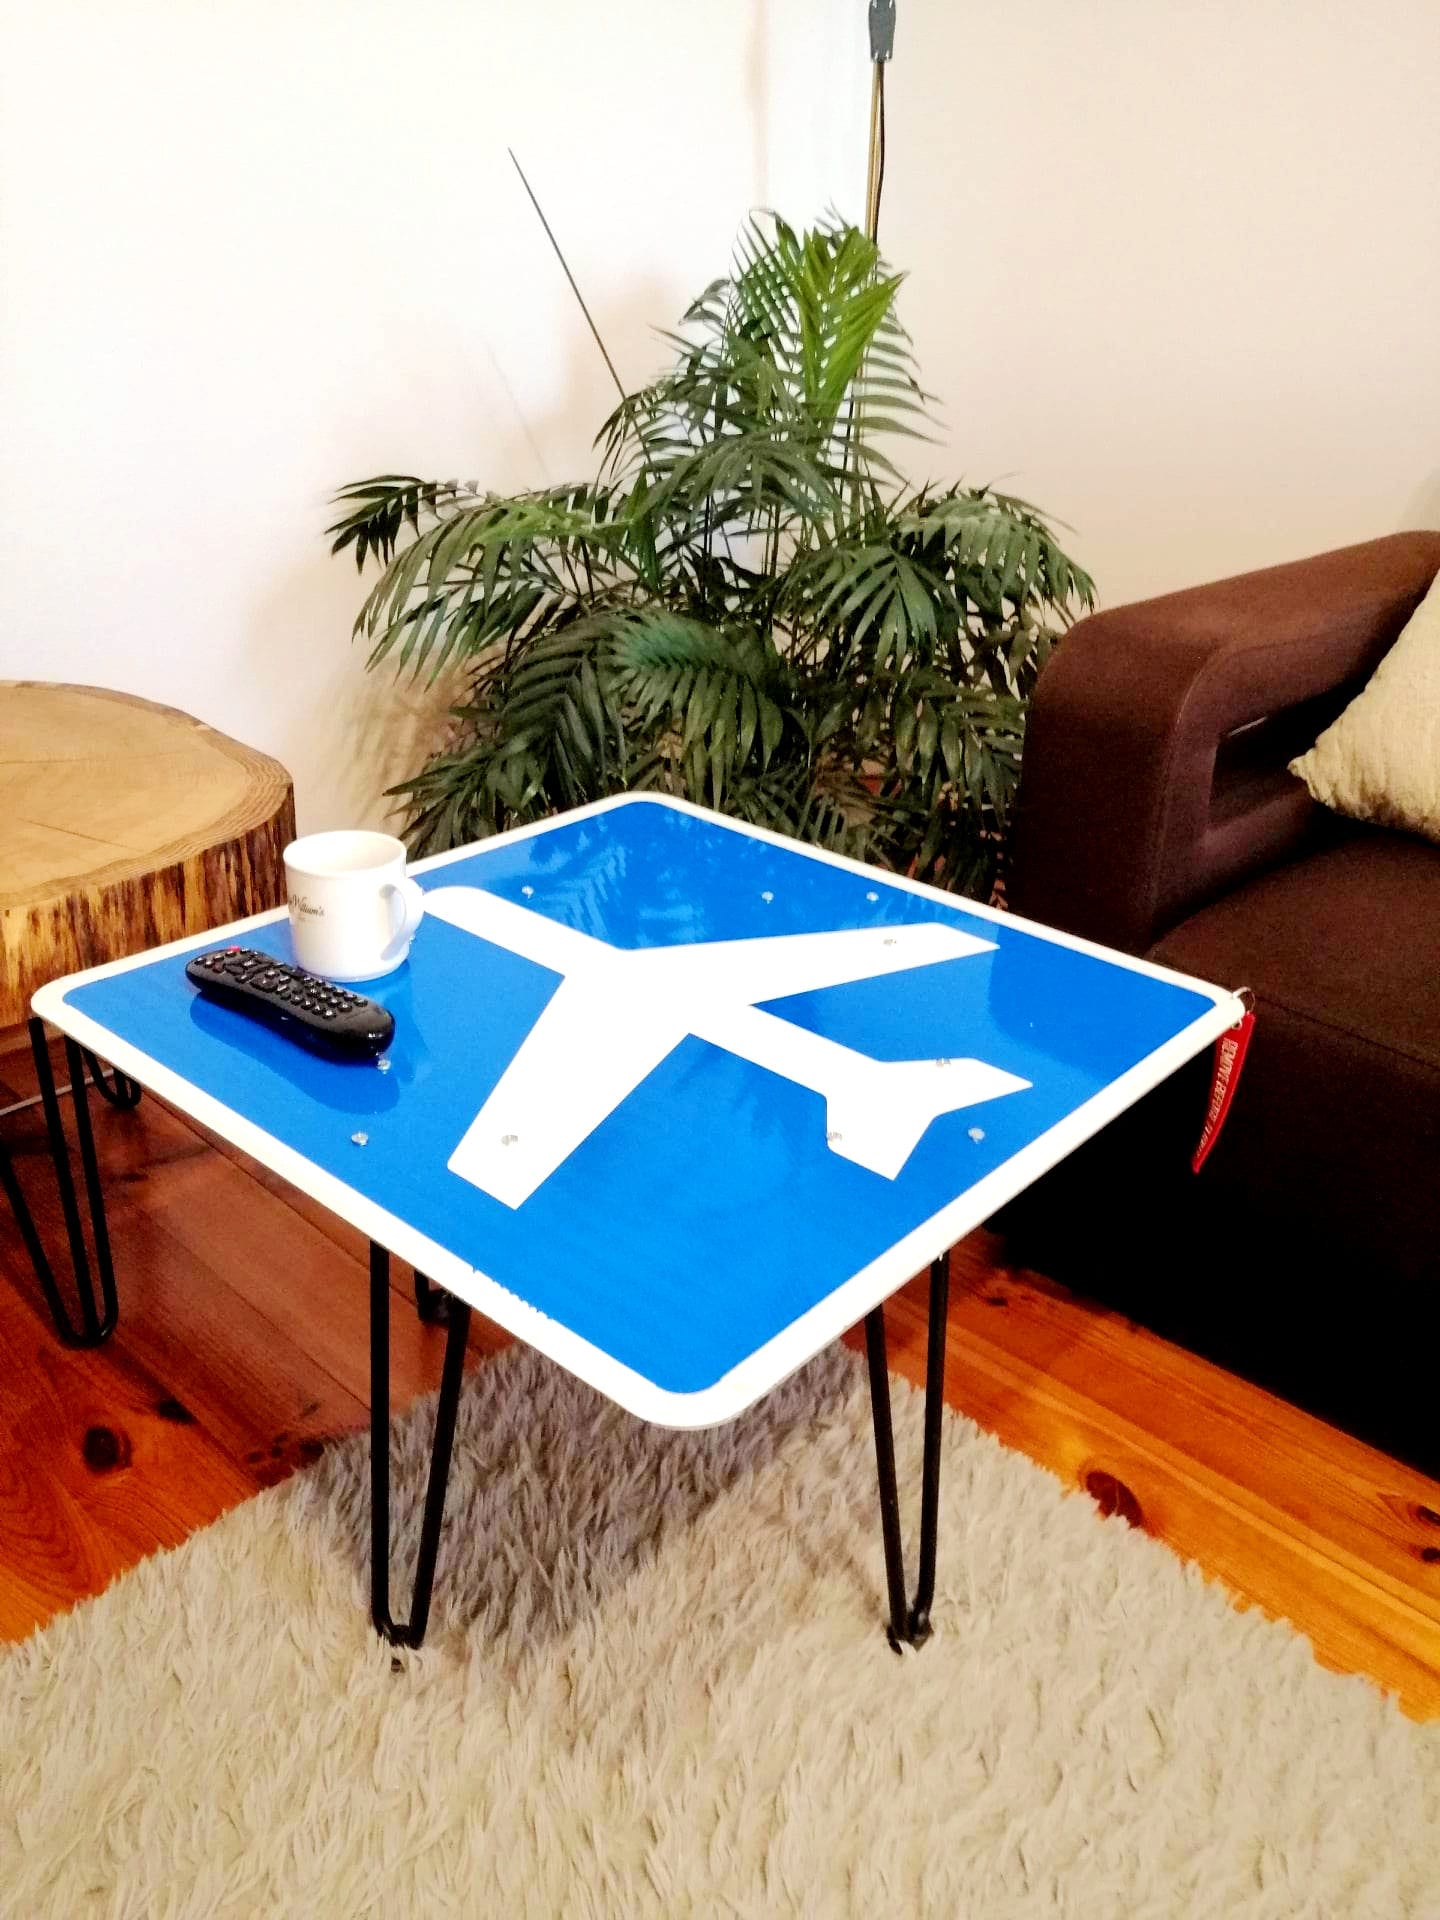 Authentic Airport Texas Highway Sign Upcycled to Table, Aviation Side Table